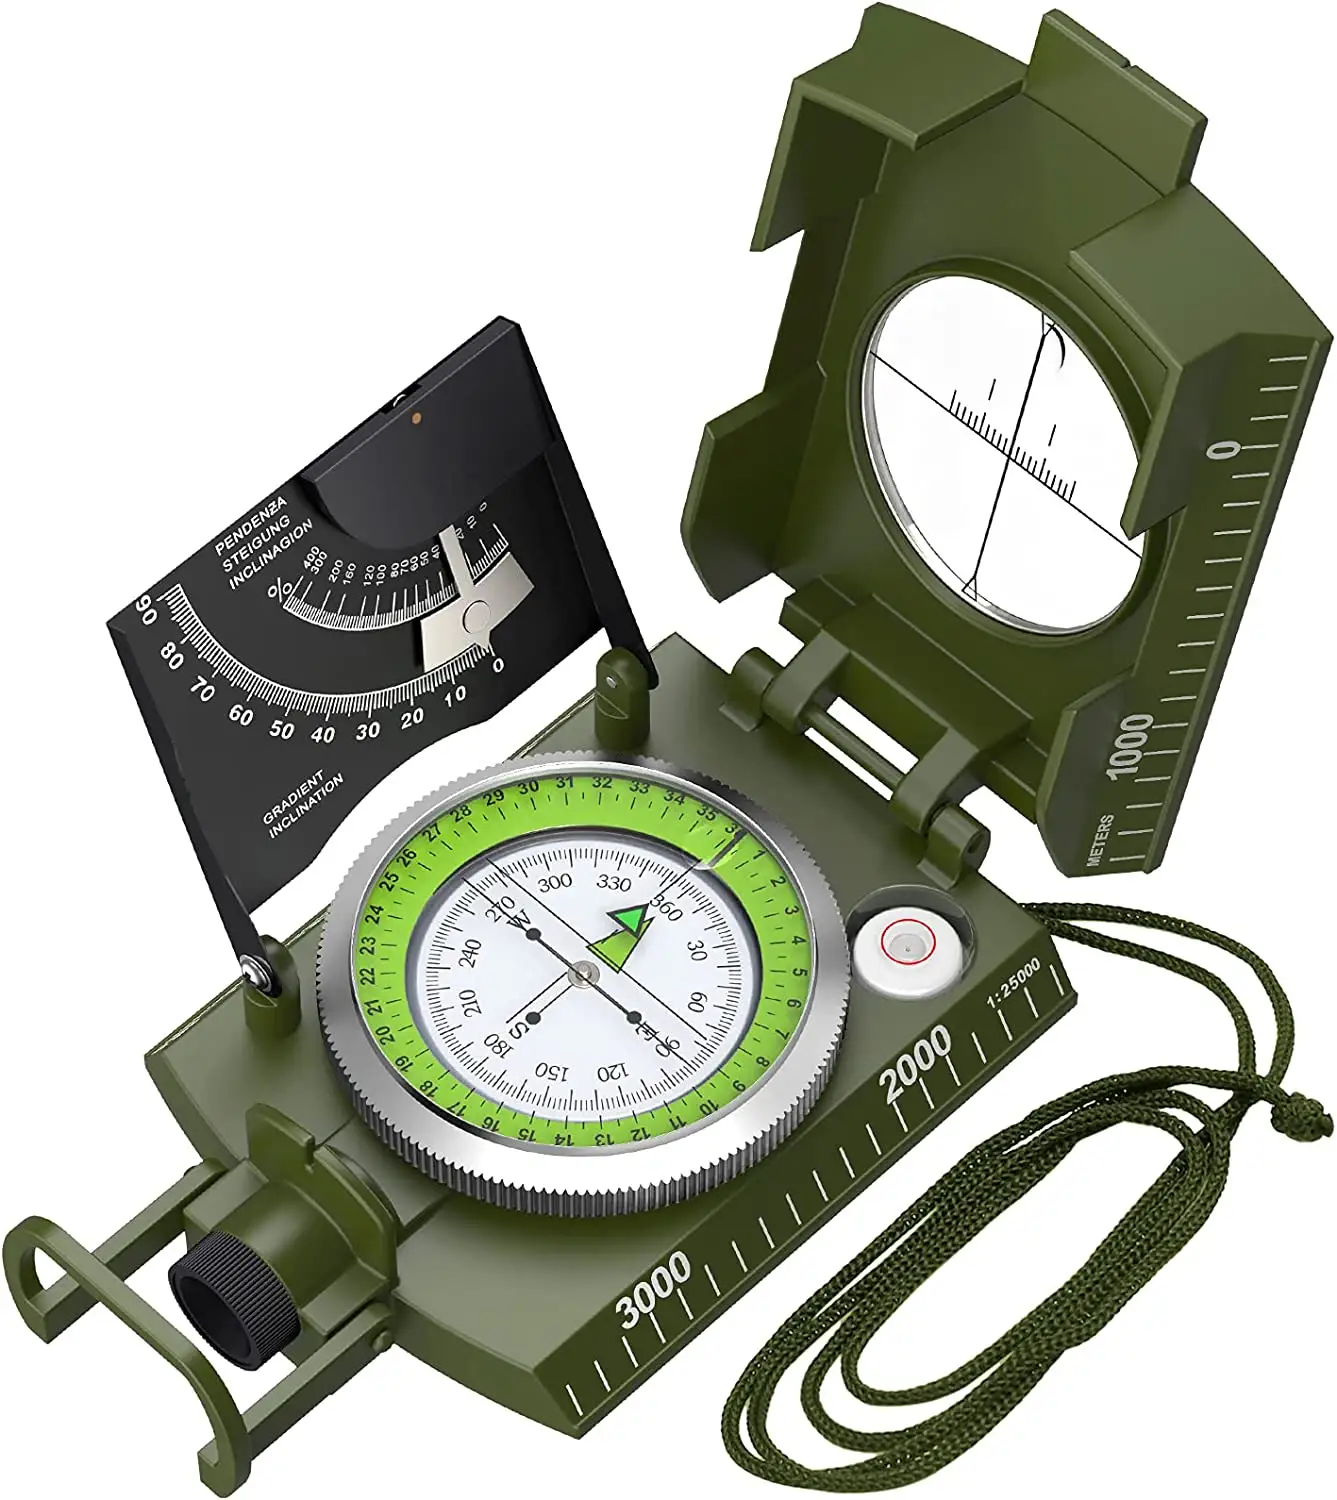 Orienteering Compass - Hiking Backpacking Compass - Advanced Scout Compass Camping and Navigation